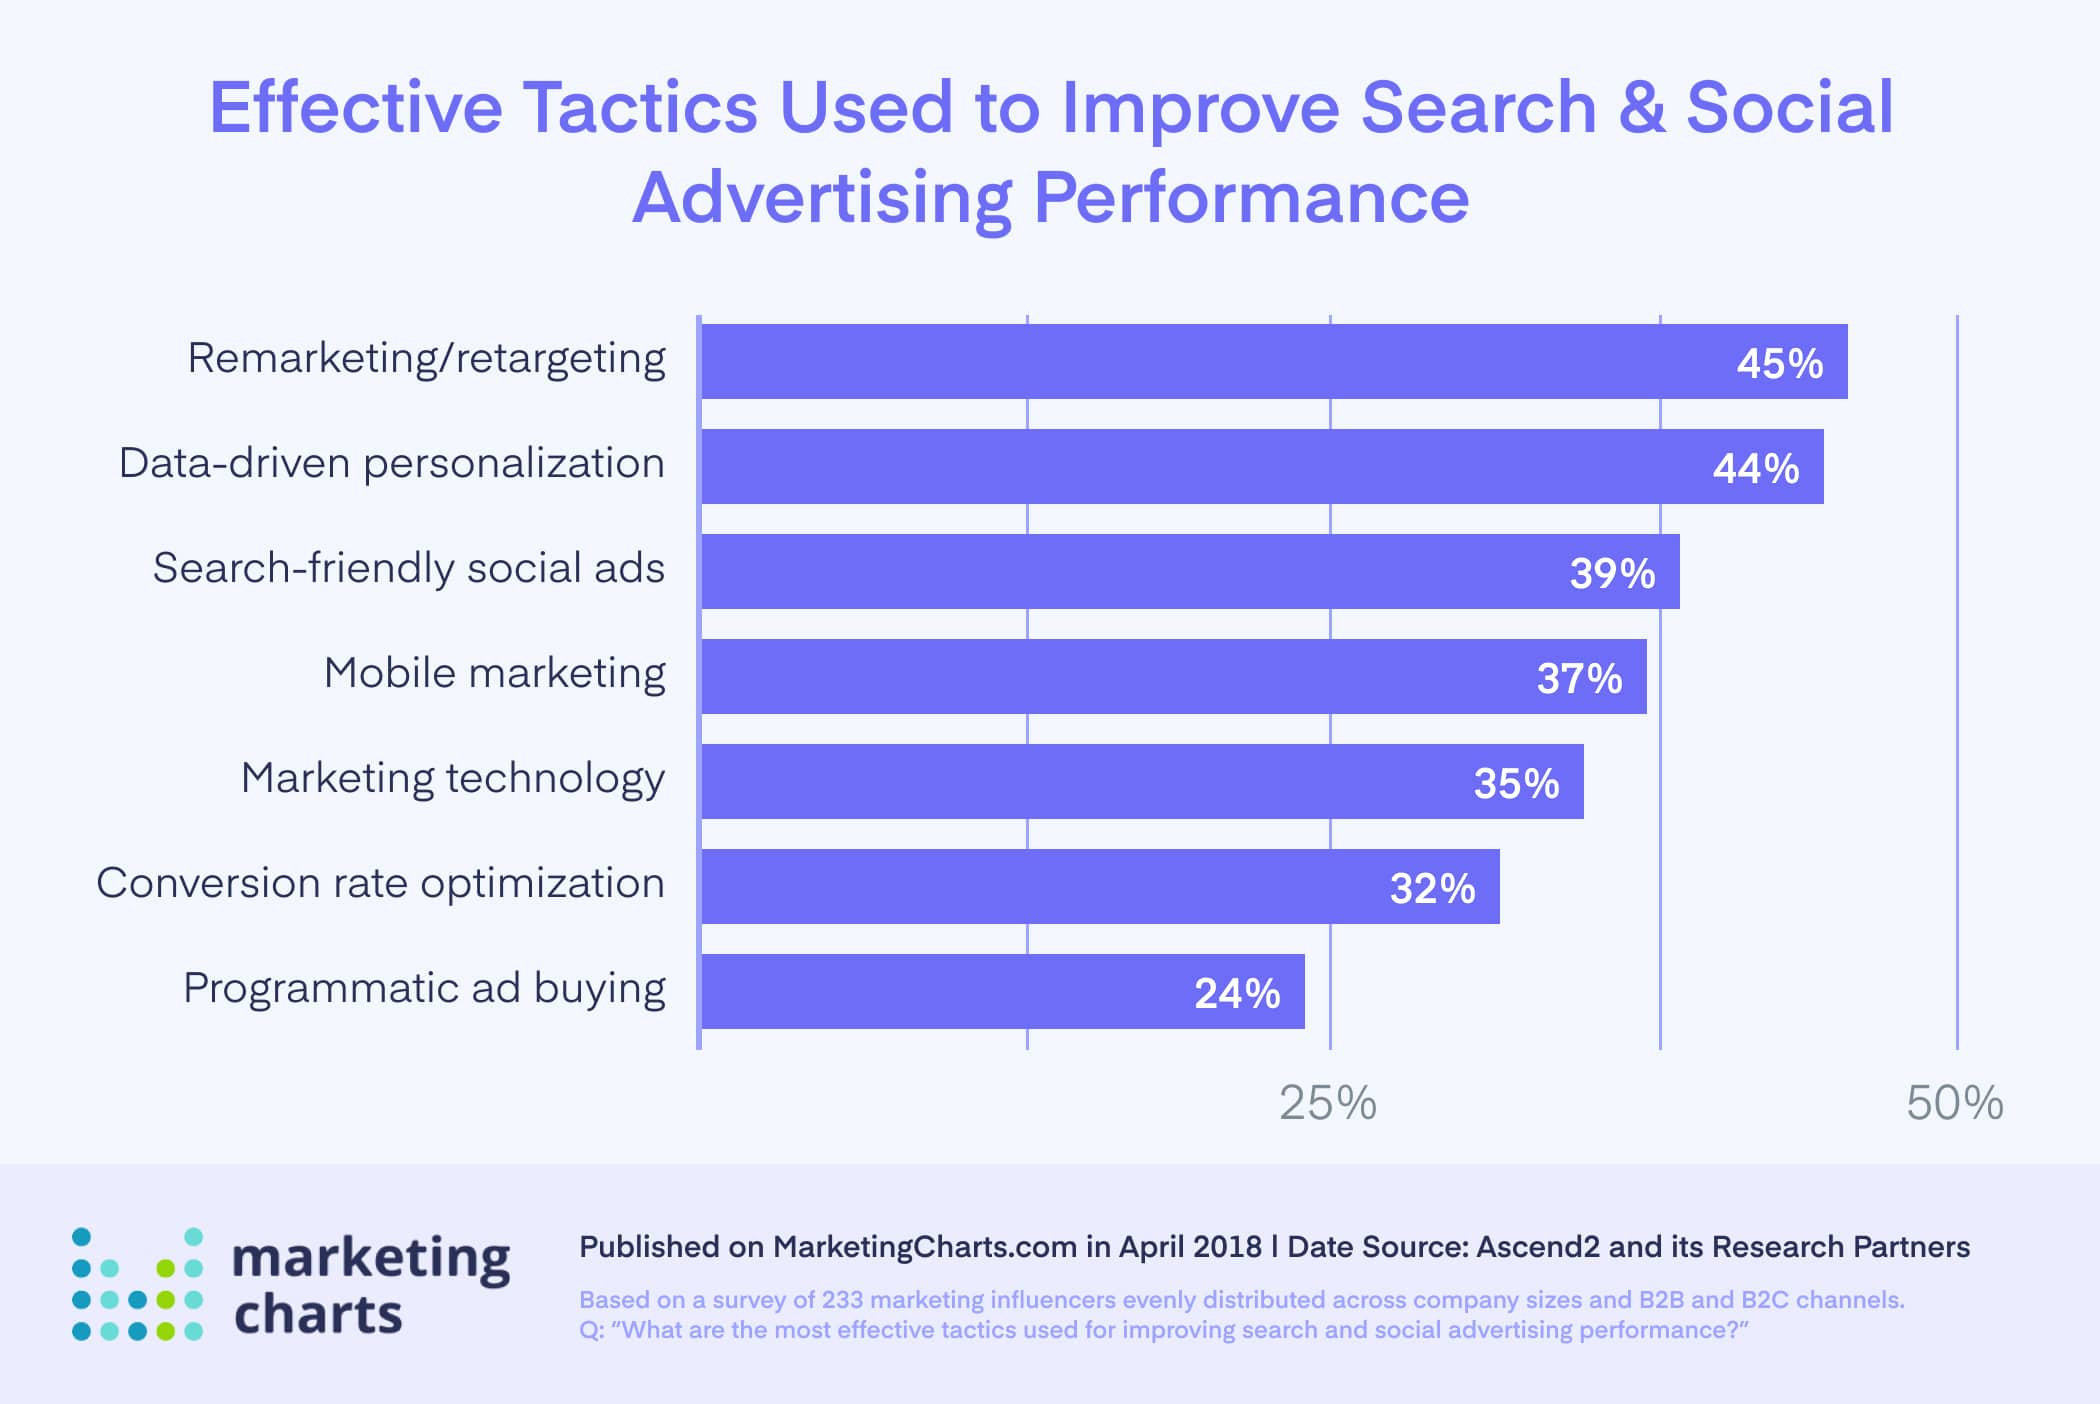 Search and advertising performance improvement tactics